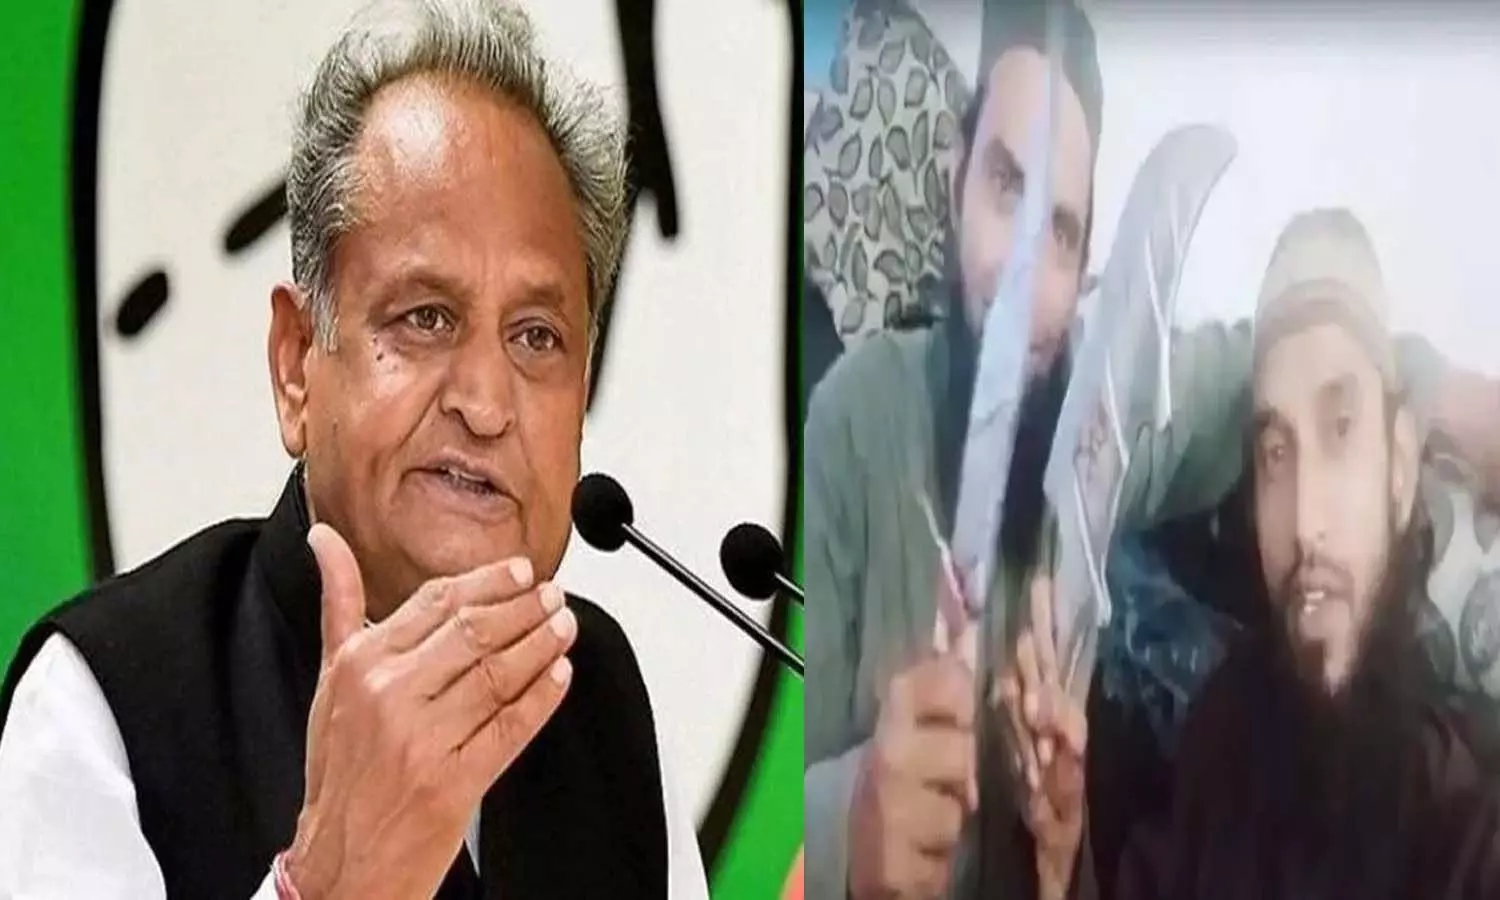 CM Gehlot failed to handle law and order, communal incidents are happening continuously